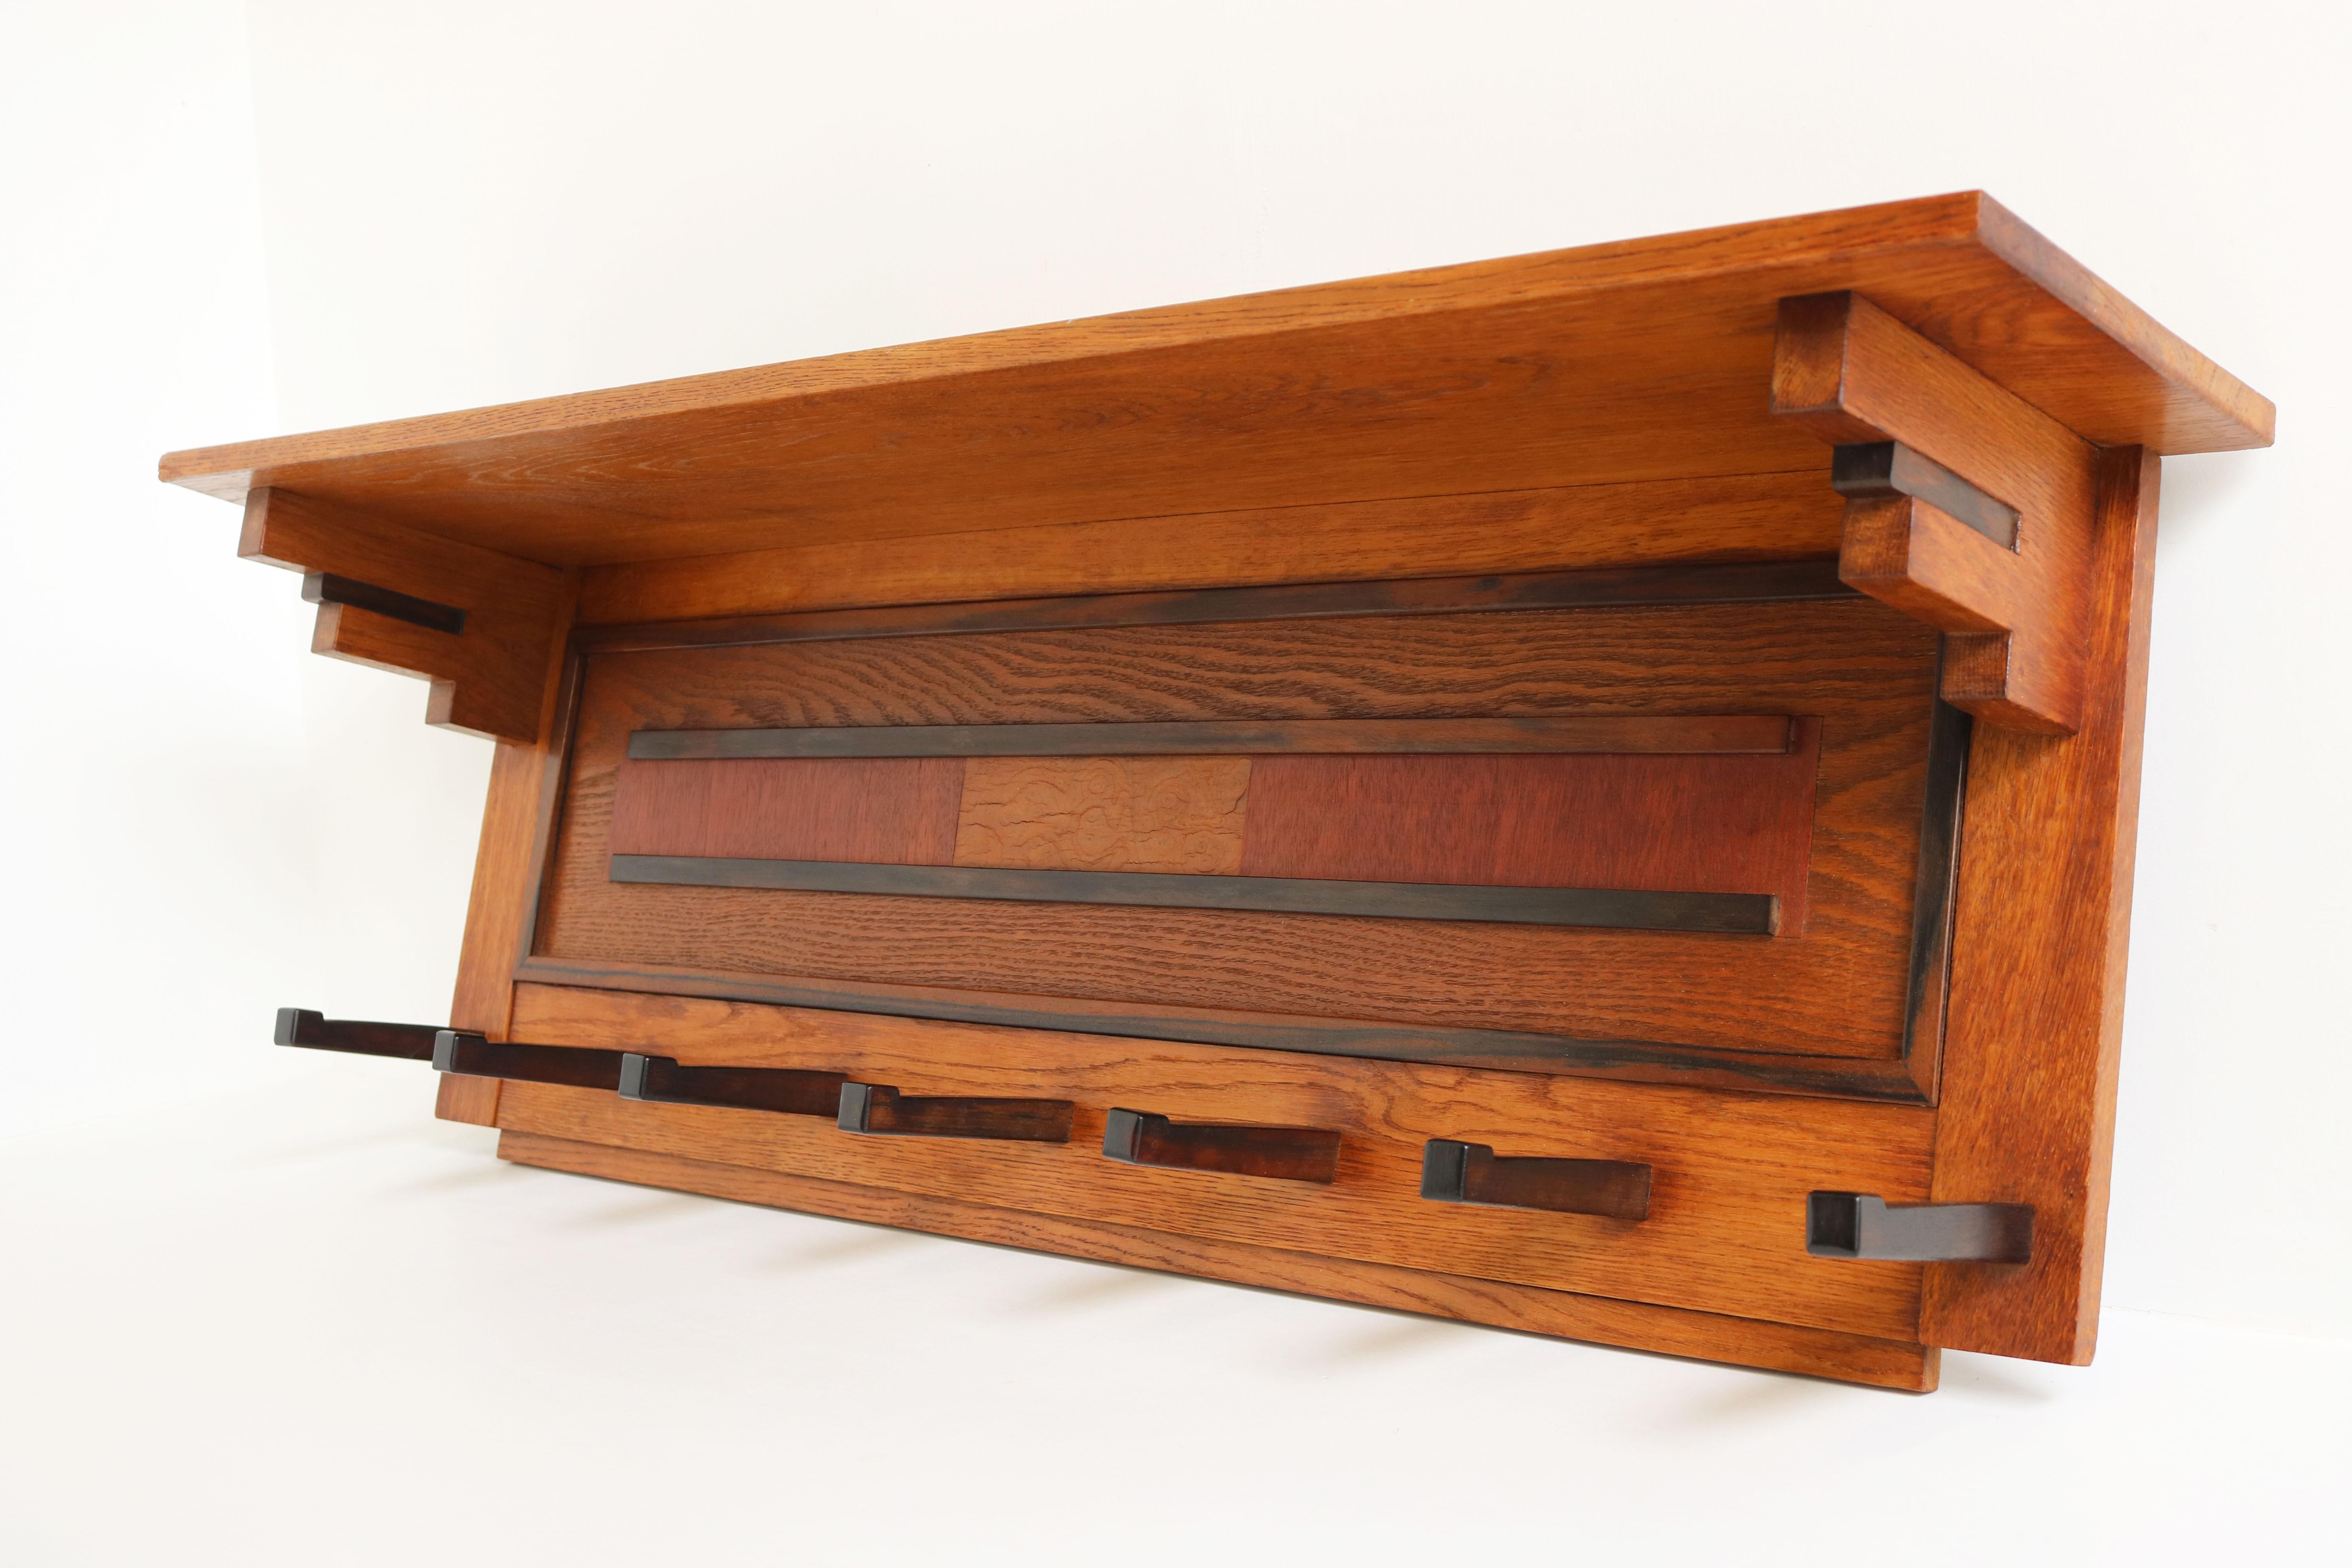 Exquisite clean Dutch Art Deco design coat rack in the Amsterdam School design style by P.E.L. Izeren for Genneper Molen 1920. 
Made from European Oak with gorgeous Macassar & mahogany details. 
For example the square in the coatracks centre made